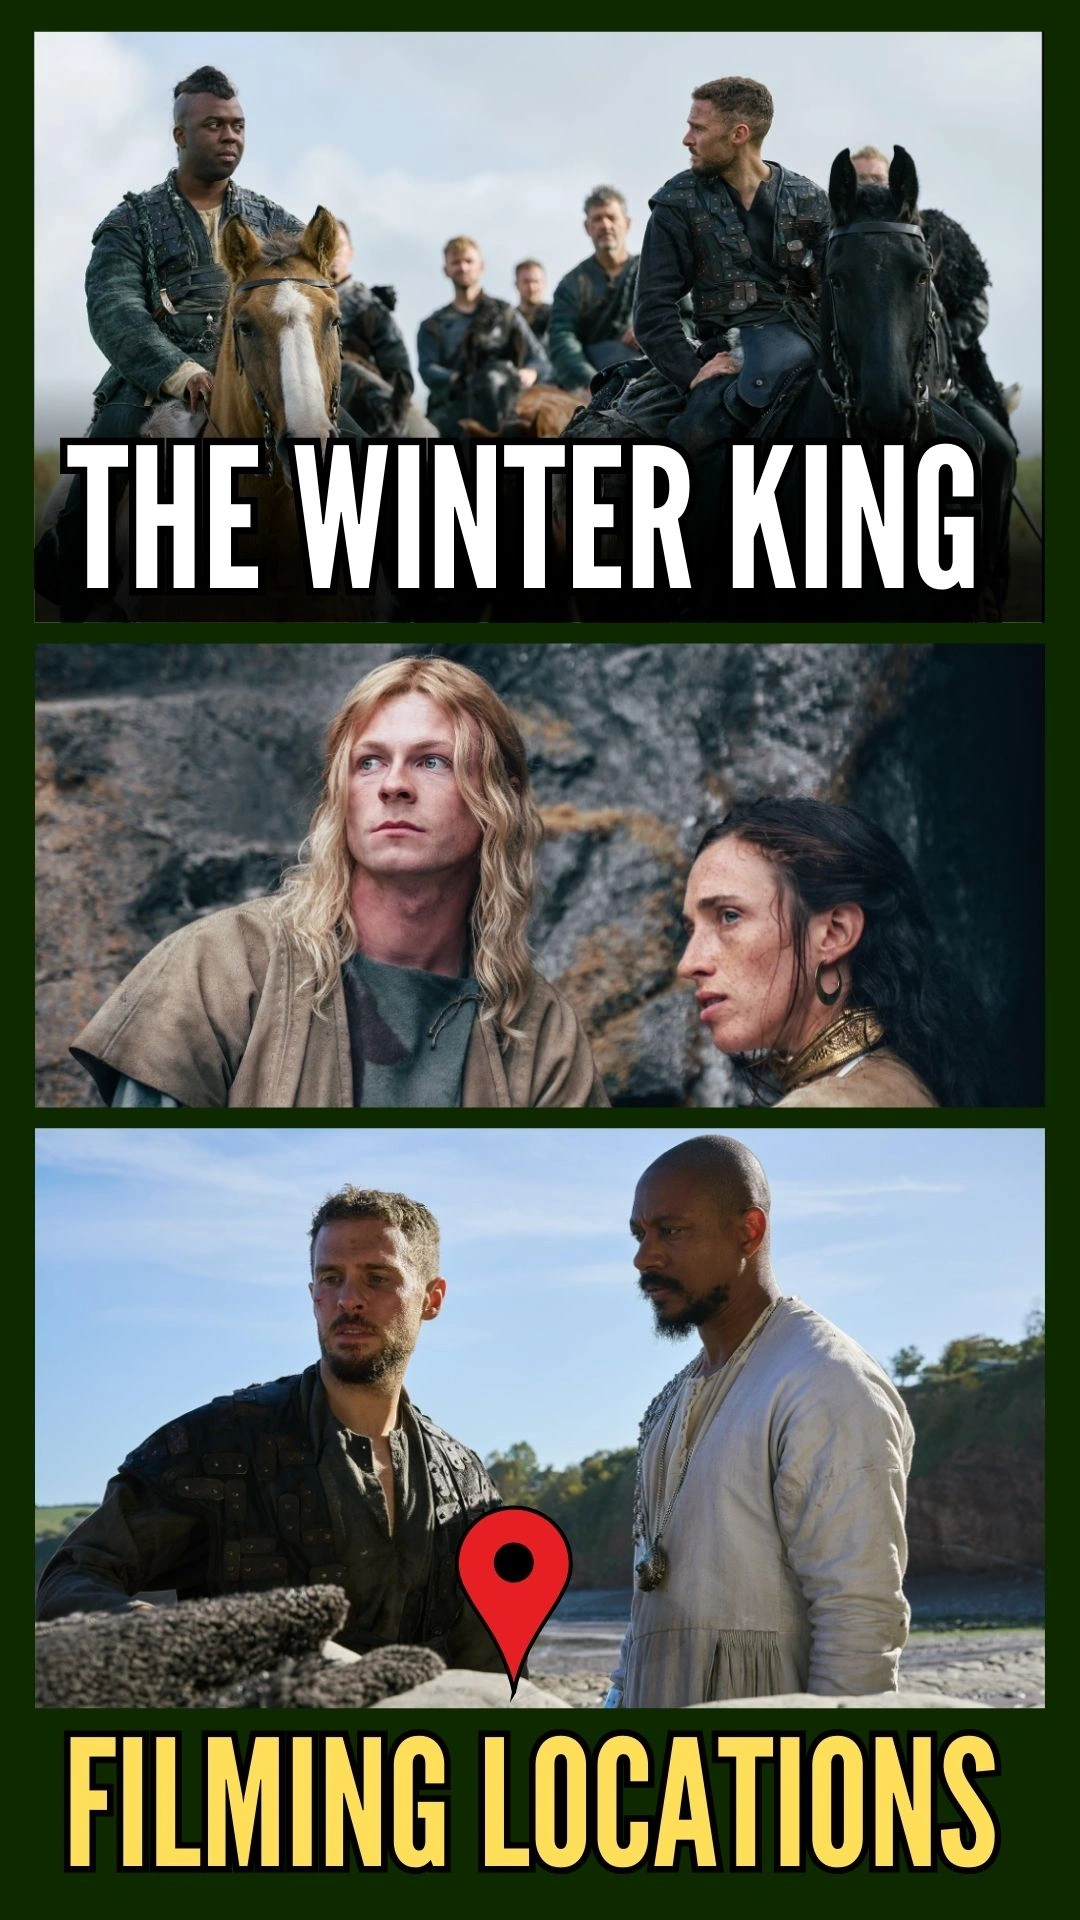 The Winter King Filming Locations